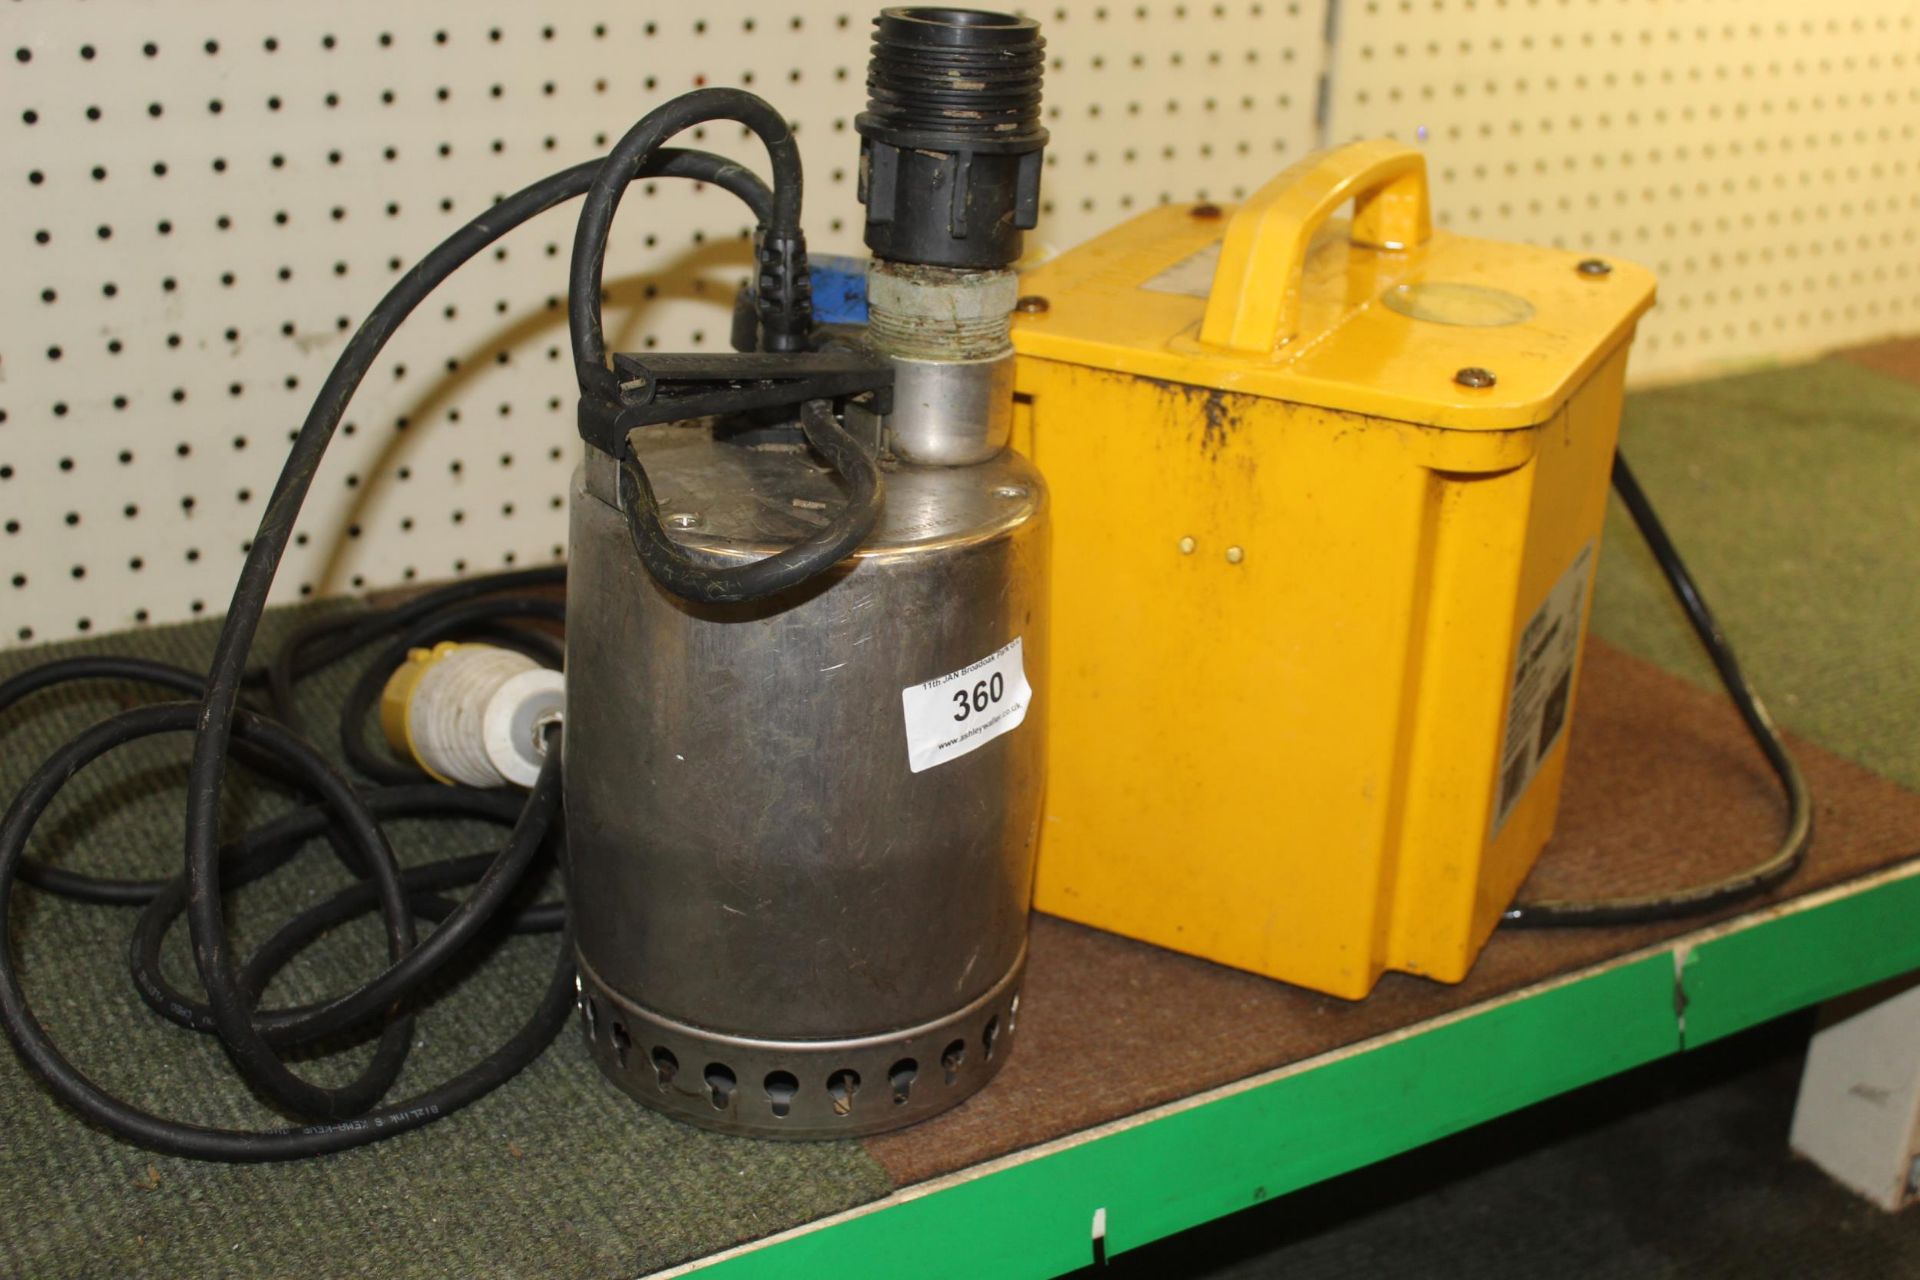 GRUNES KP 250 STAINLESS STEEL SUBMERSIBLE PUMP AND 130V TRANSPORTER (WORKING) + VAT